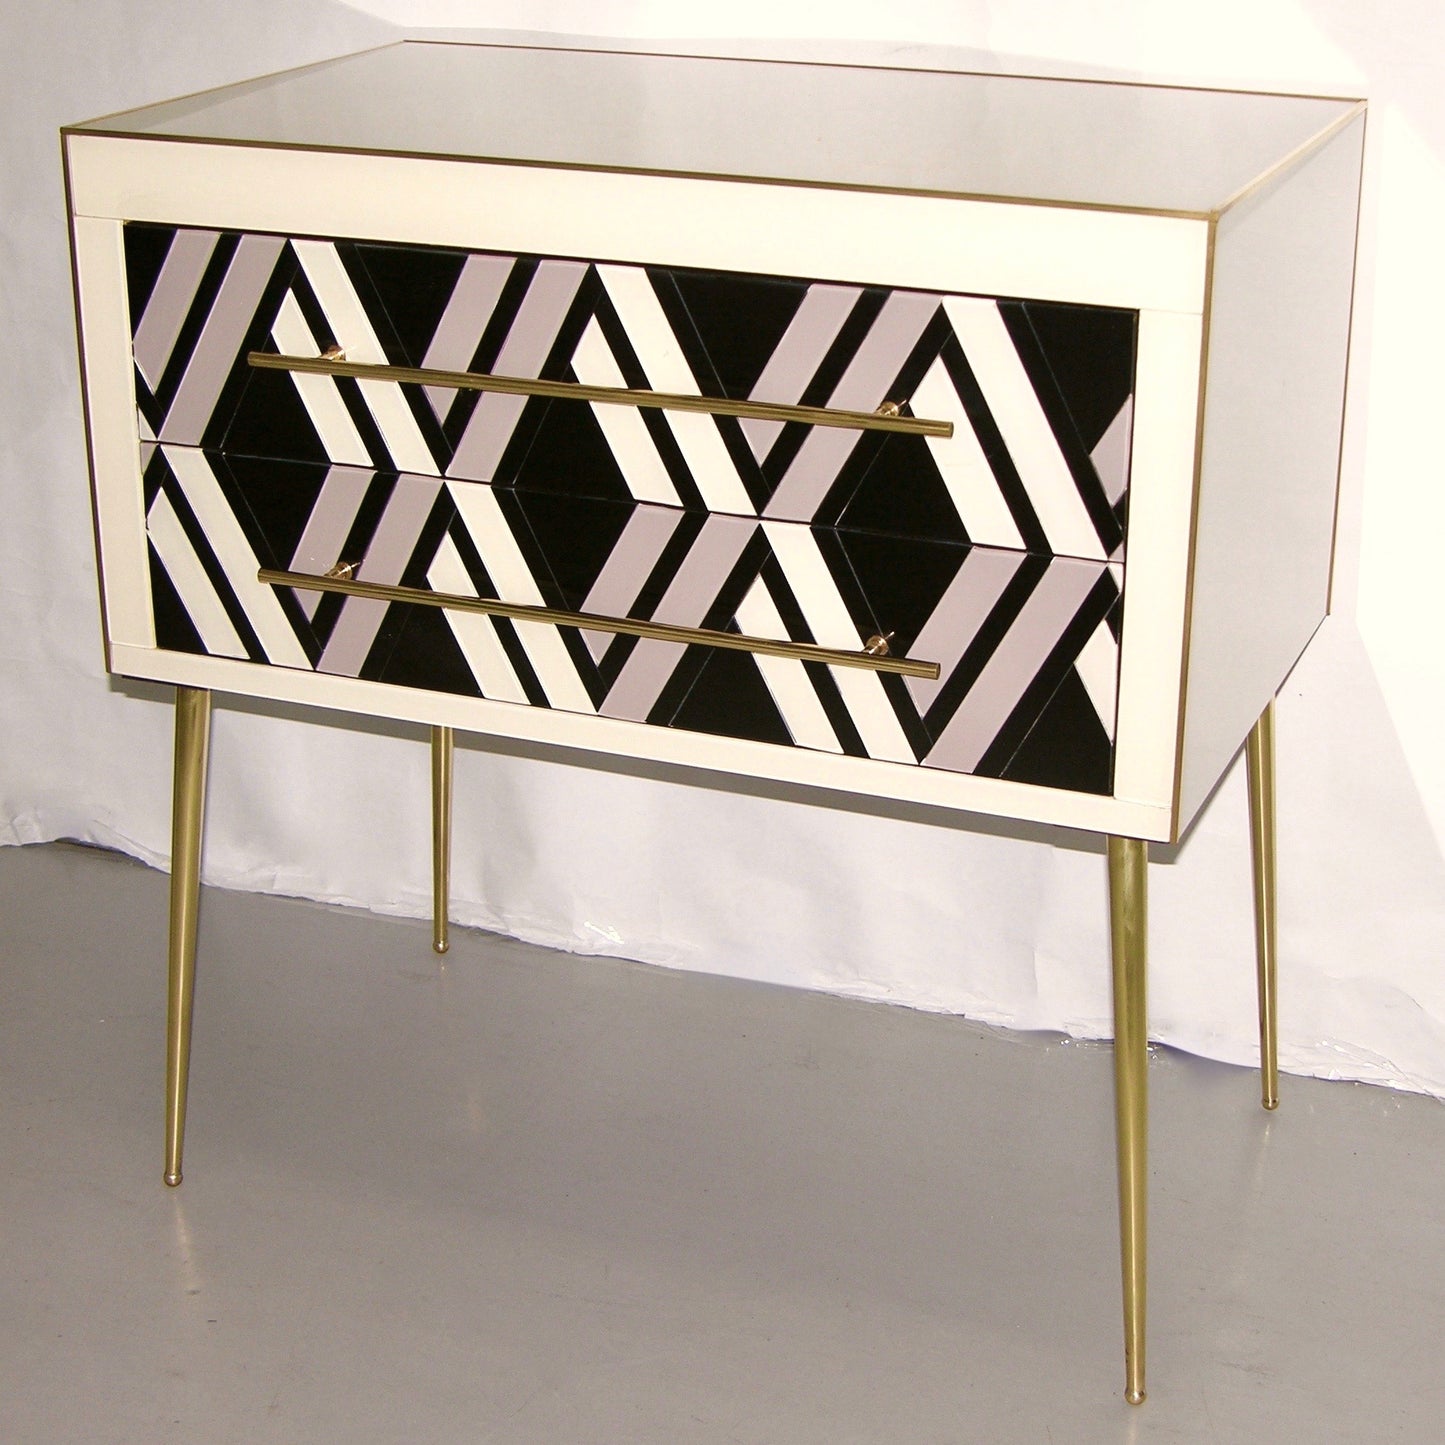 1990 Italian Graphic Pair of Geometric Black White Rose Gray Chests/ Side Tables - Cosulich Interiors & Antiques